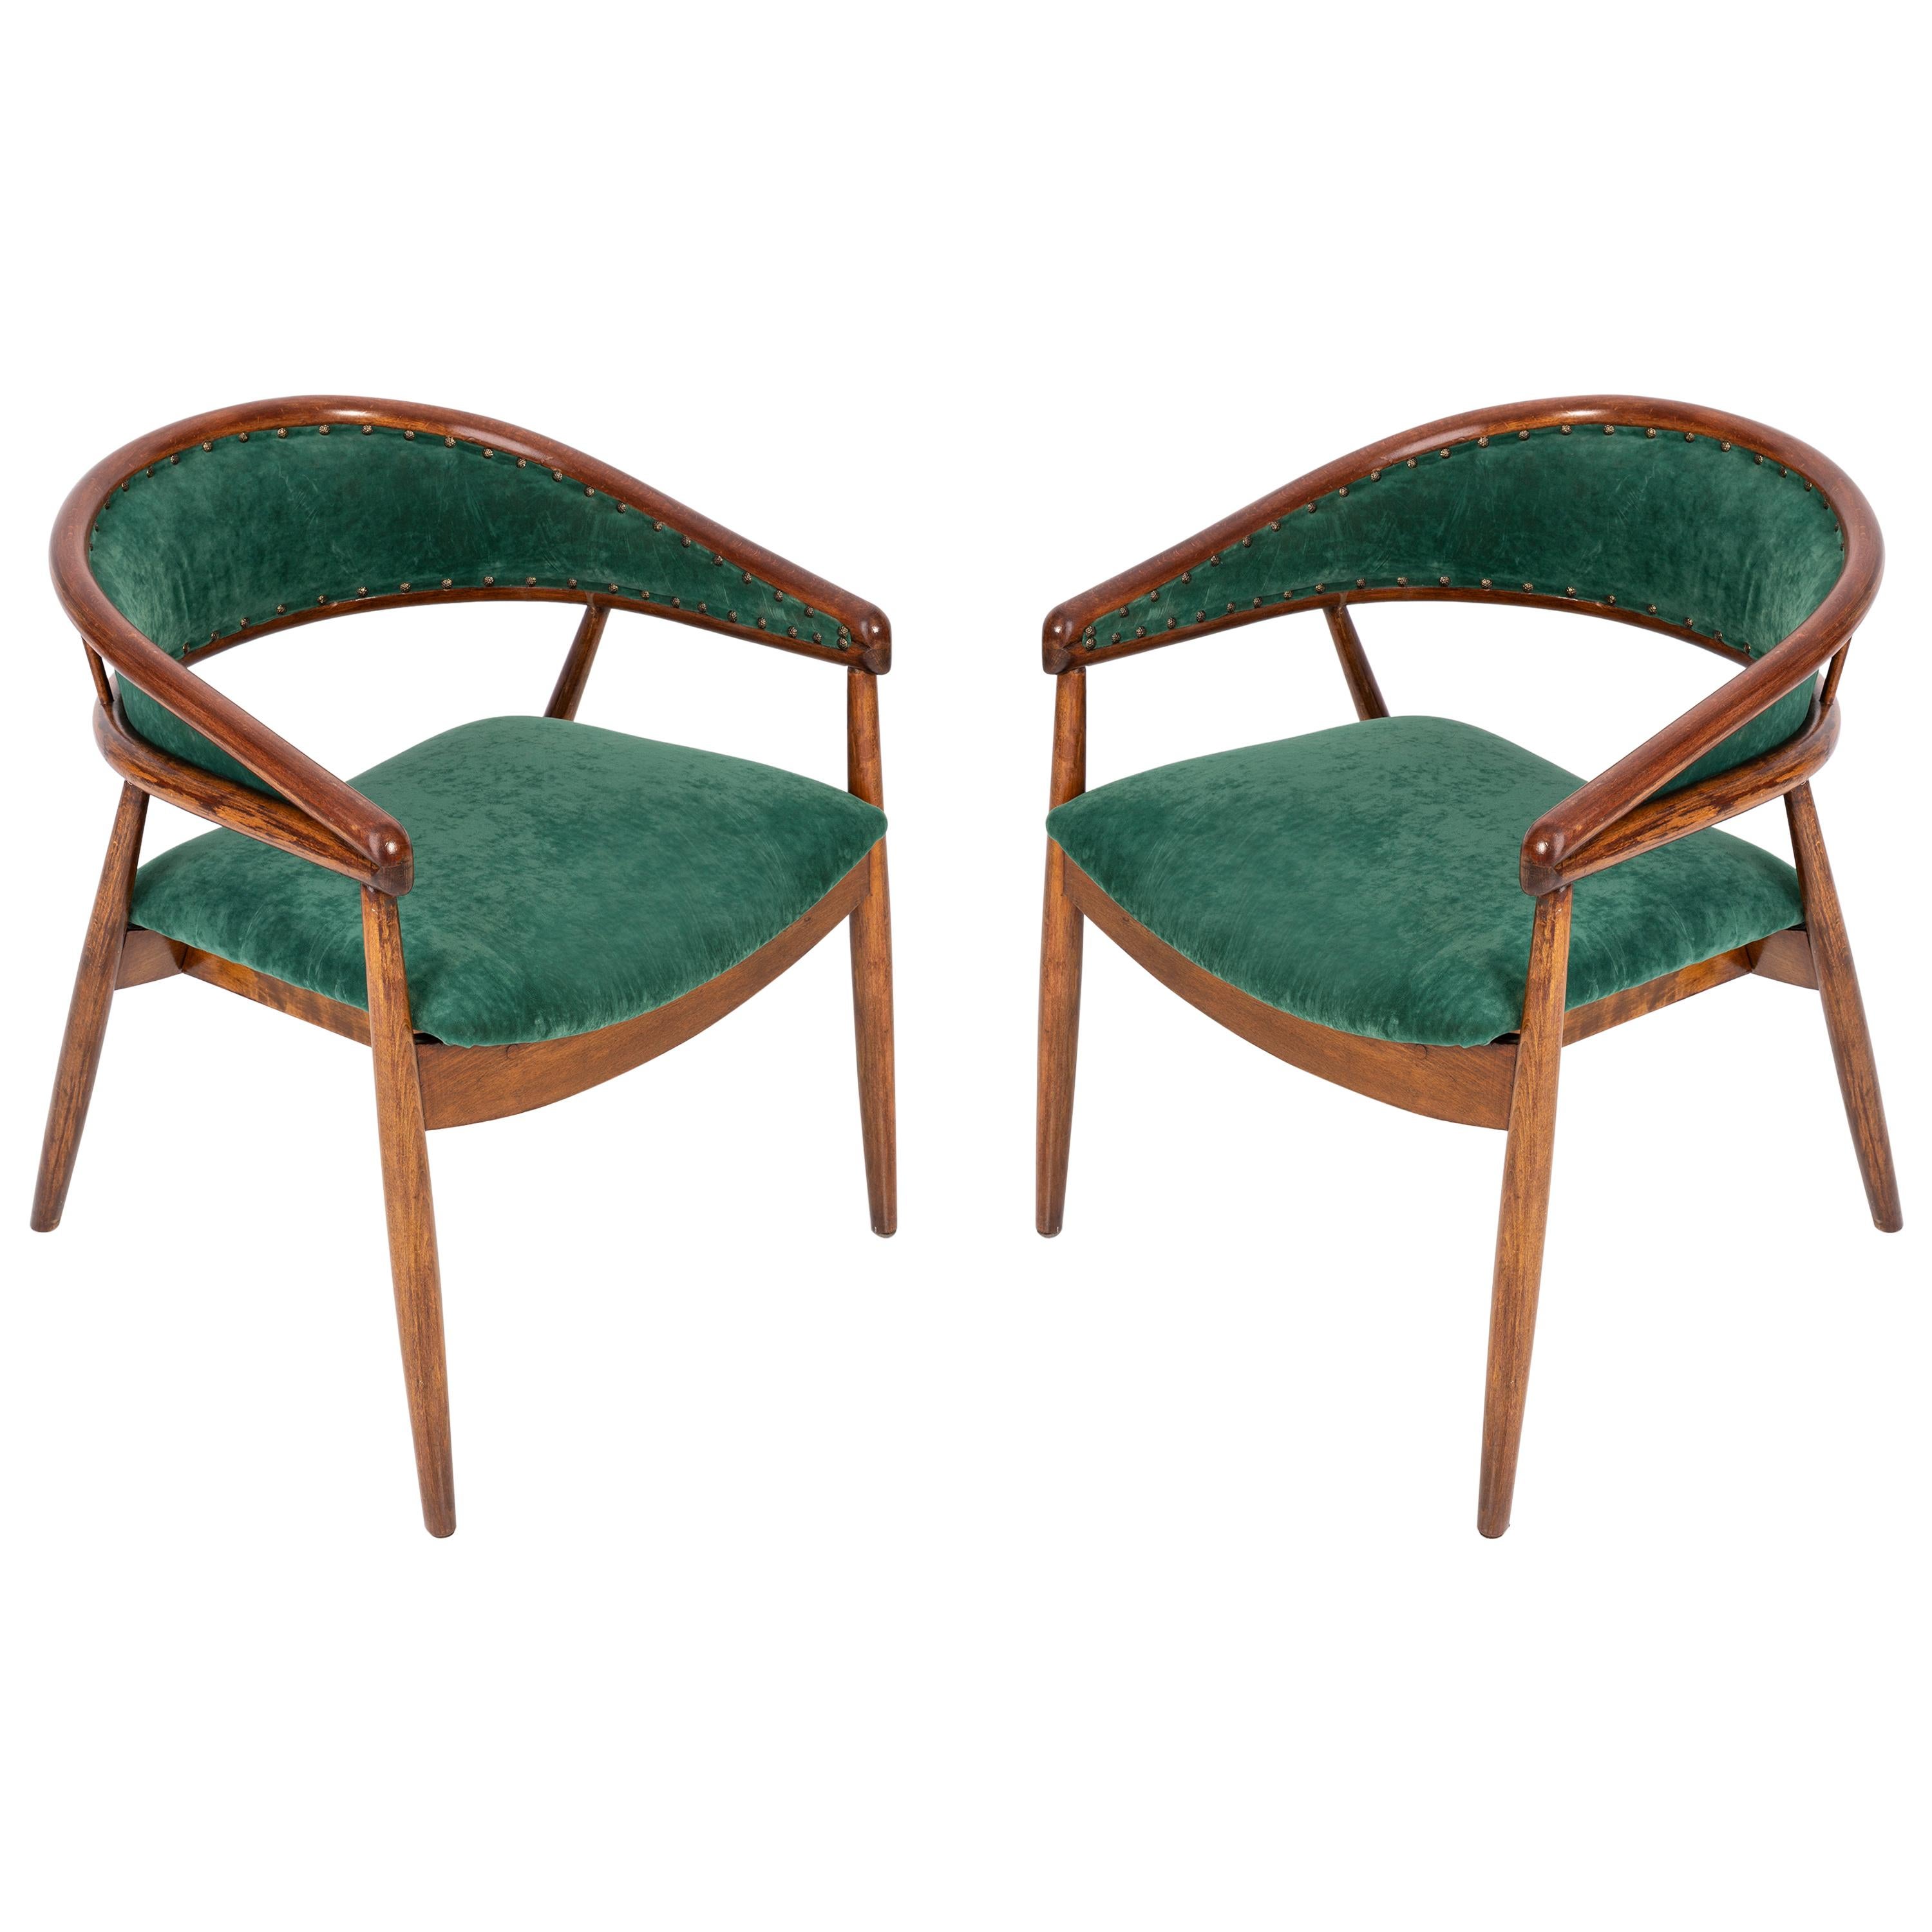 Set of Two James Mont Bent Beech Armchairs, Dark Green, B-3300 Type, 1960s For Sale